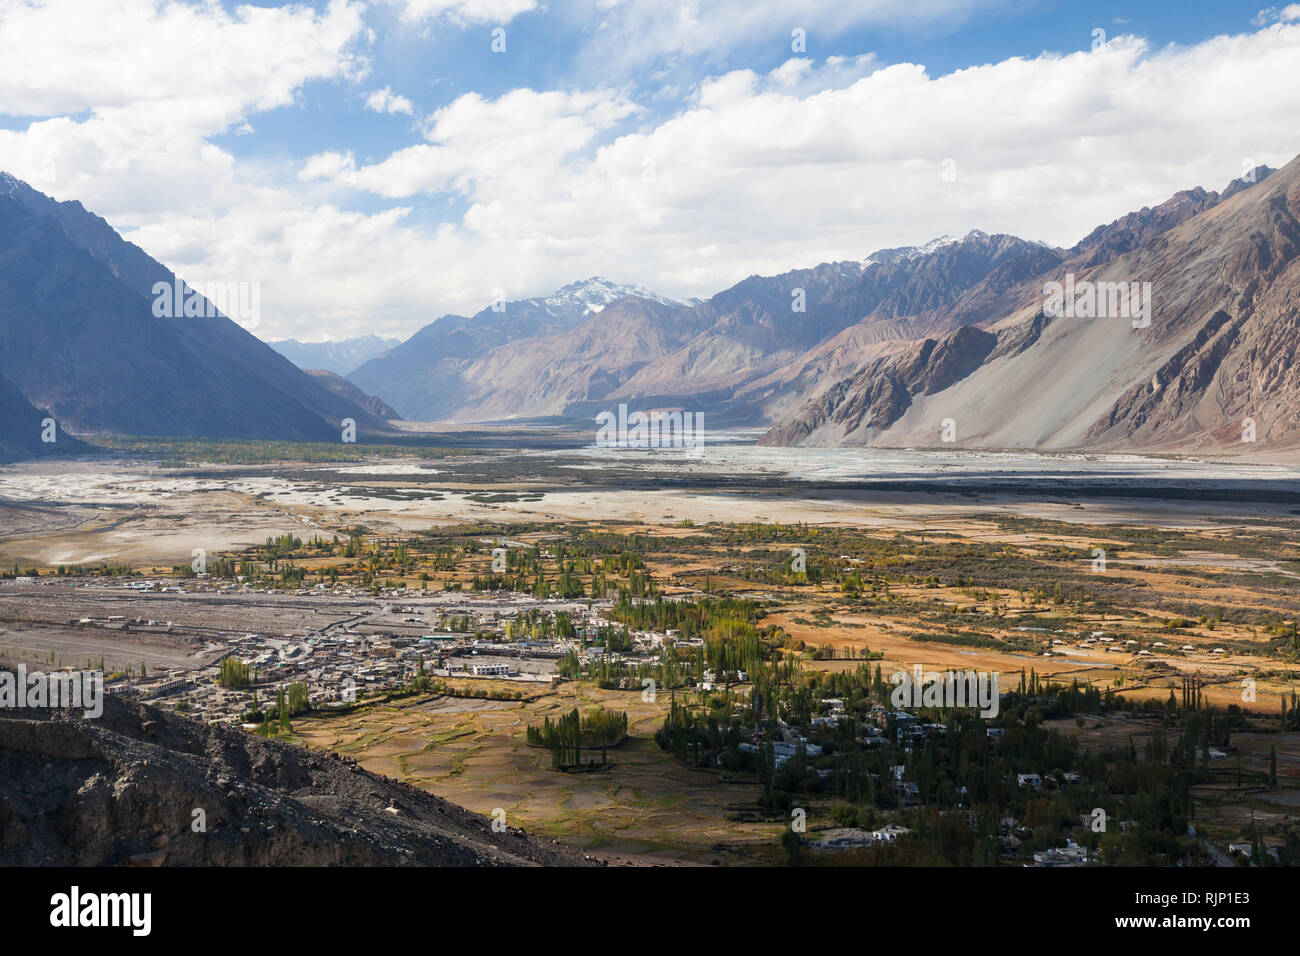 Autumnal scenery of Nubra Valley (with visible Diskit village) seen from Diskit Gompa (also known as Deskit Gompa), Ladakh, Jammu and Kashmir, India Stock Photo